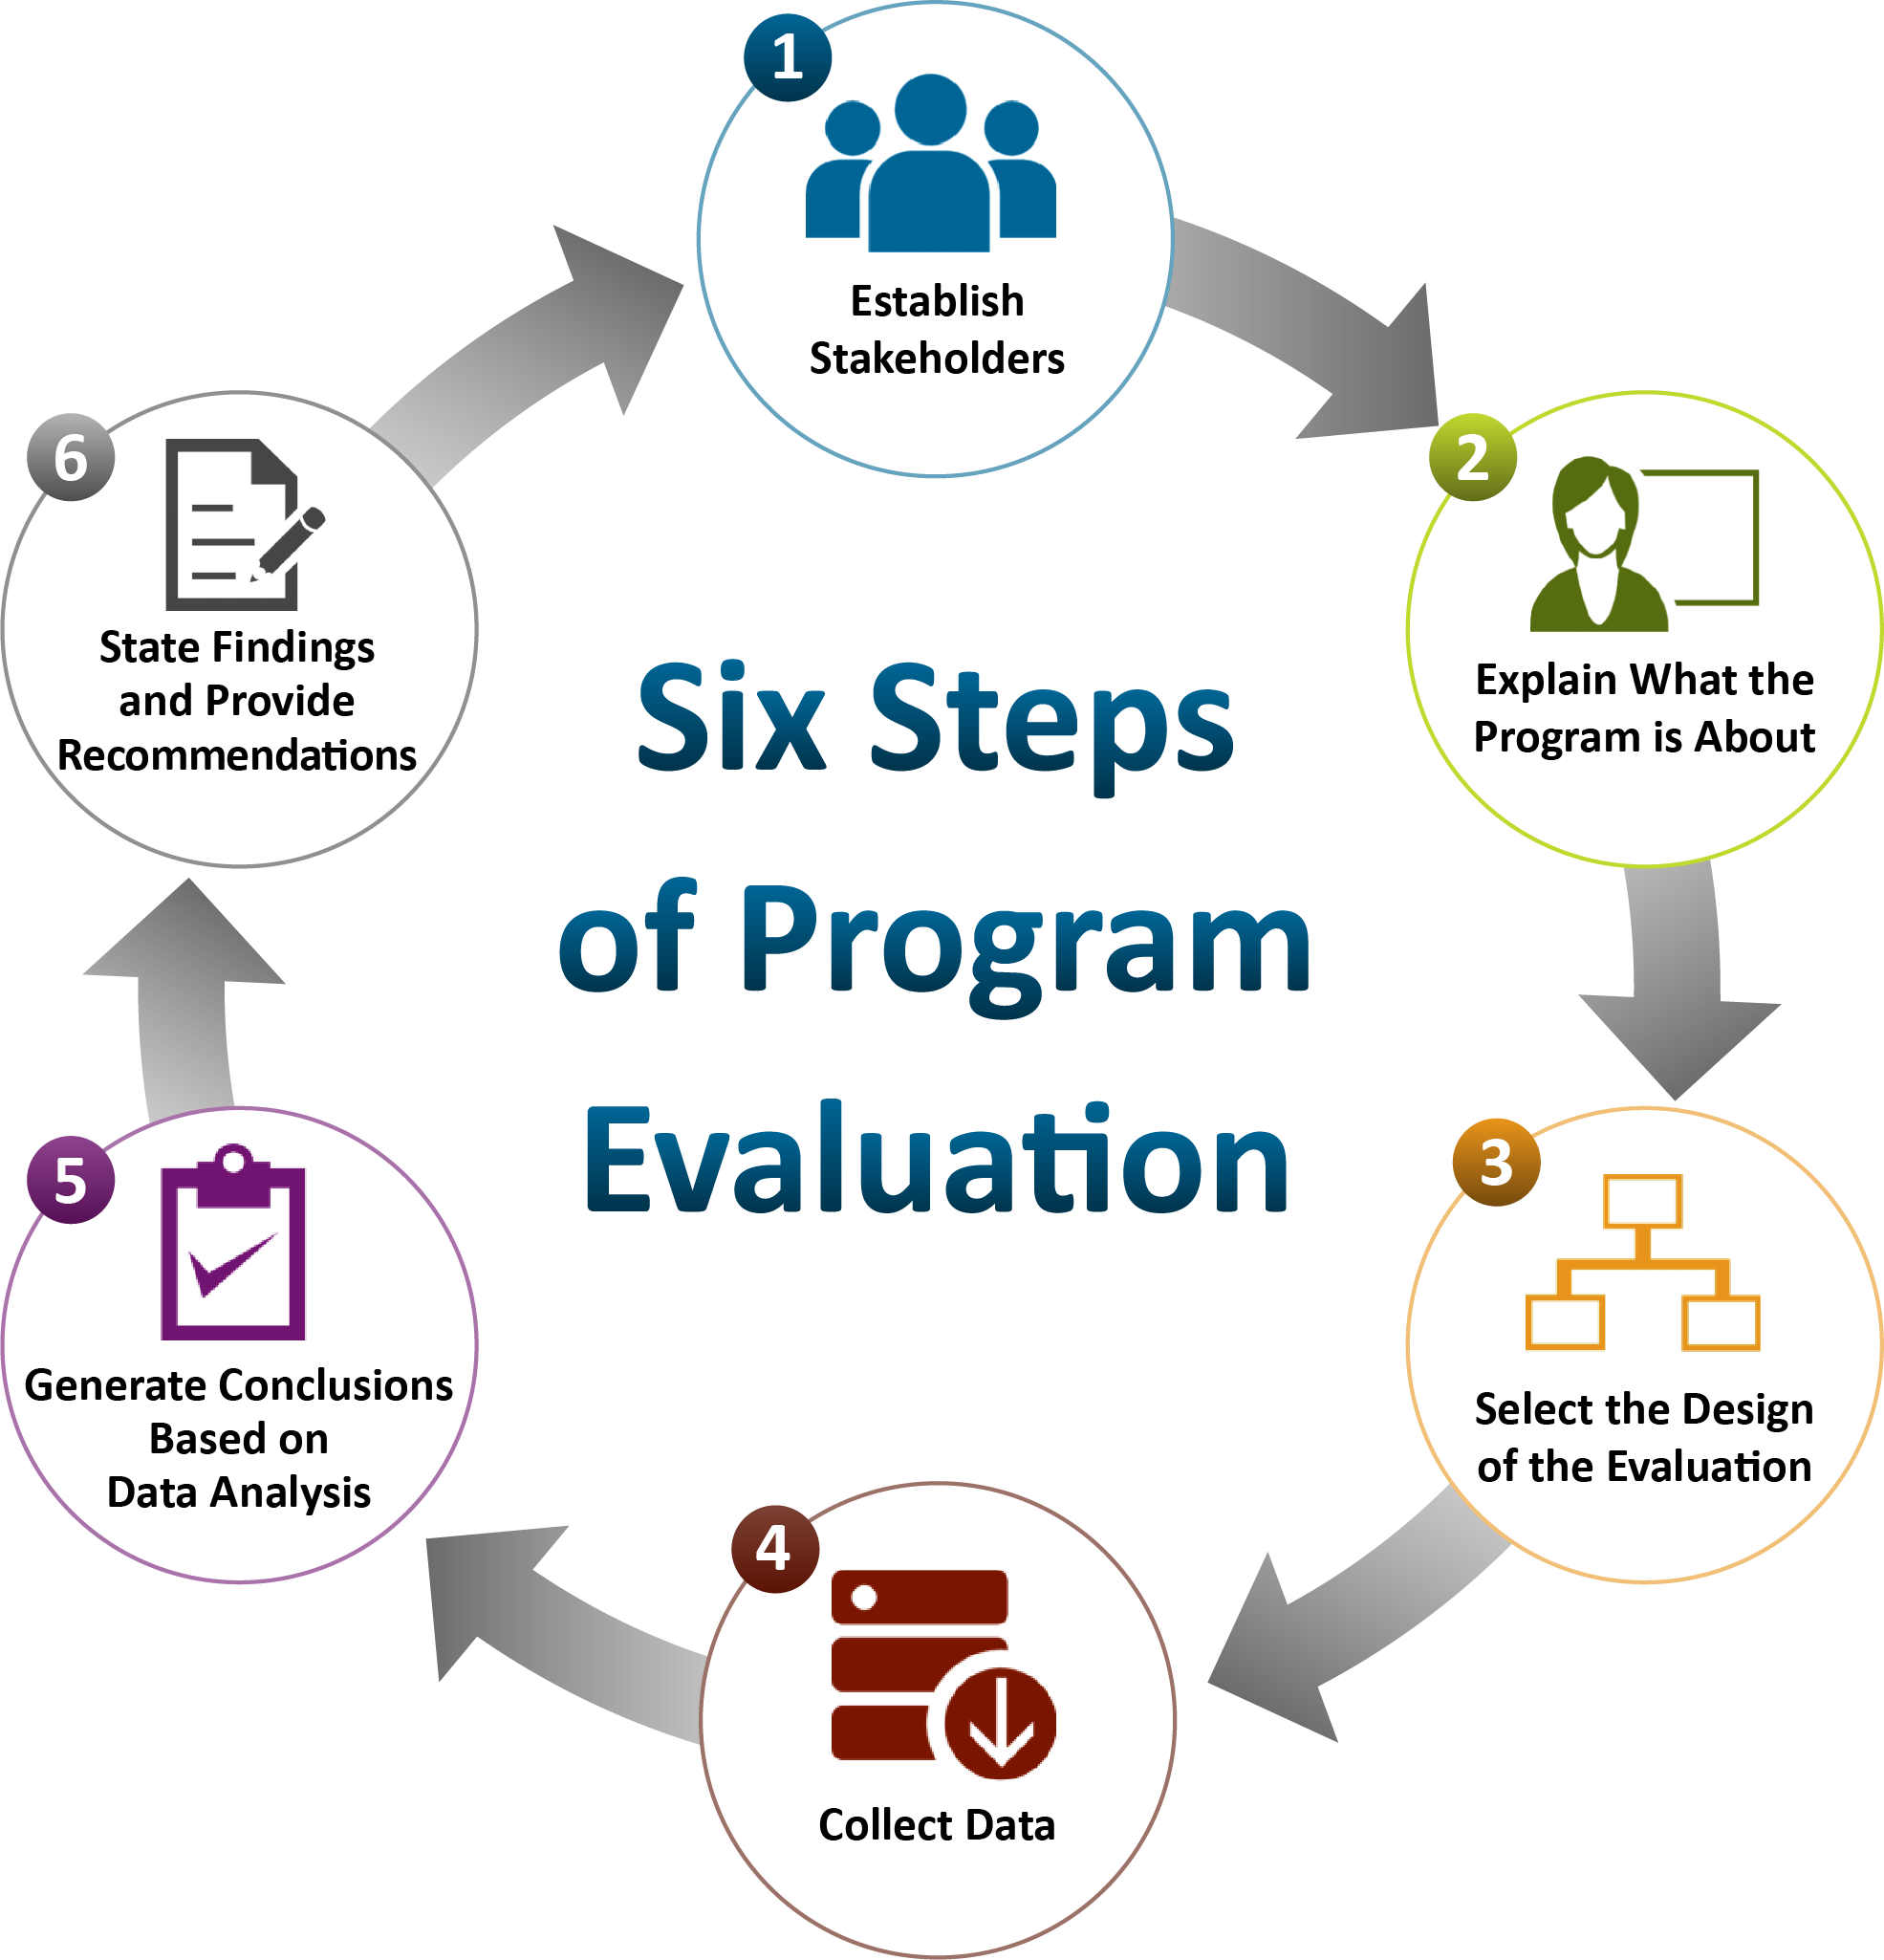 Chapter 36. Introduction to Evaluation, Section 1. A Framework for Program  Evaluation: A Gateway to Tools, Tools